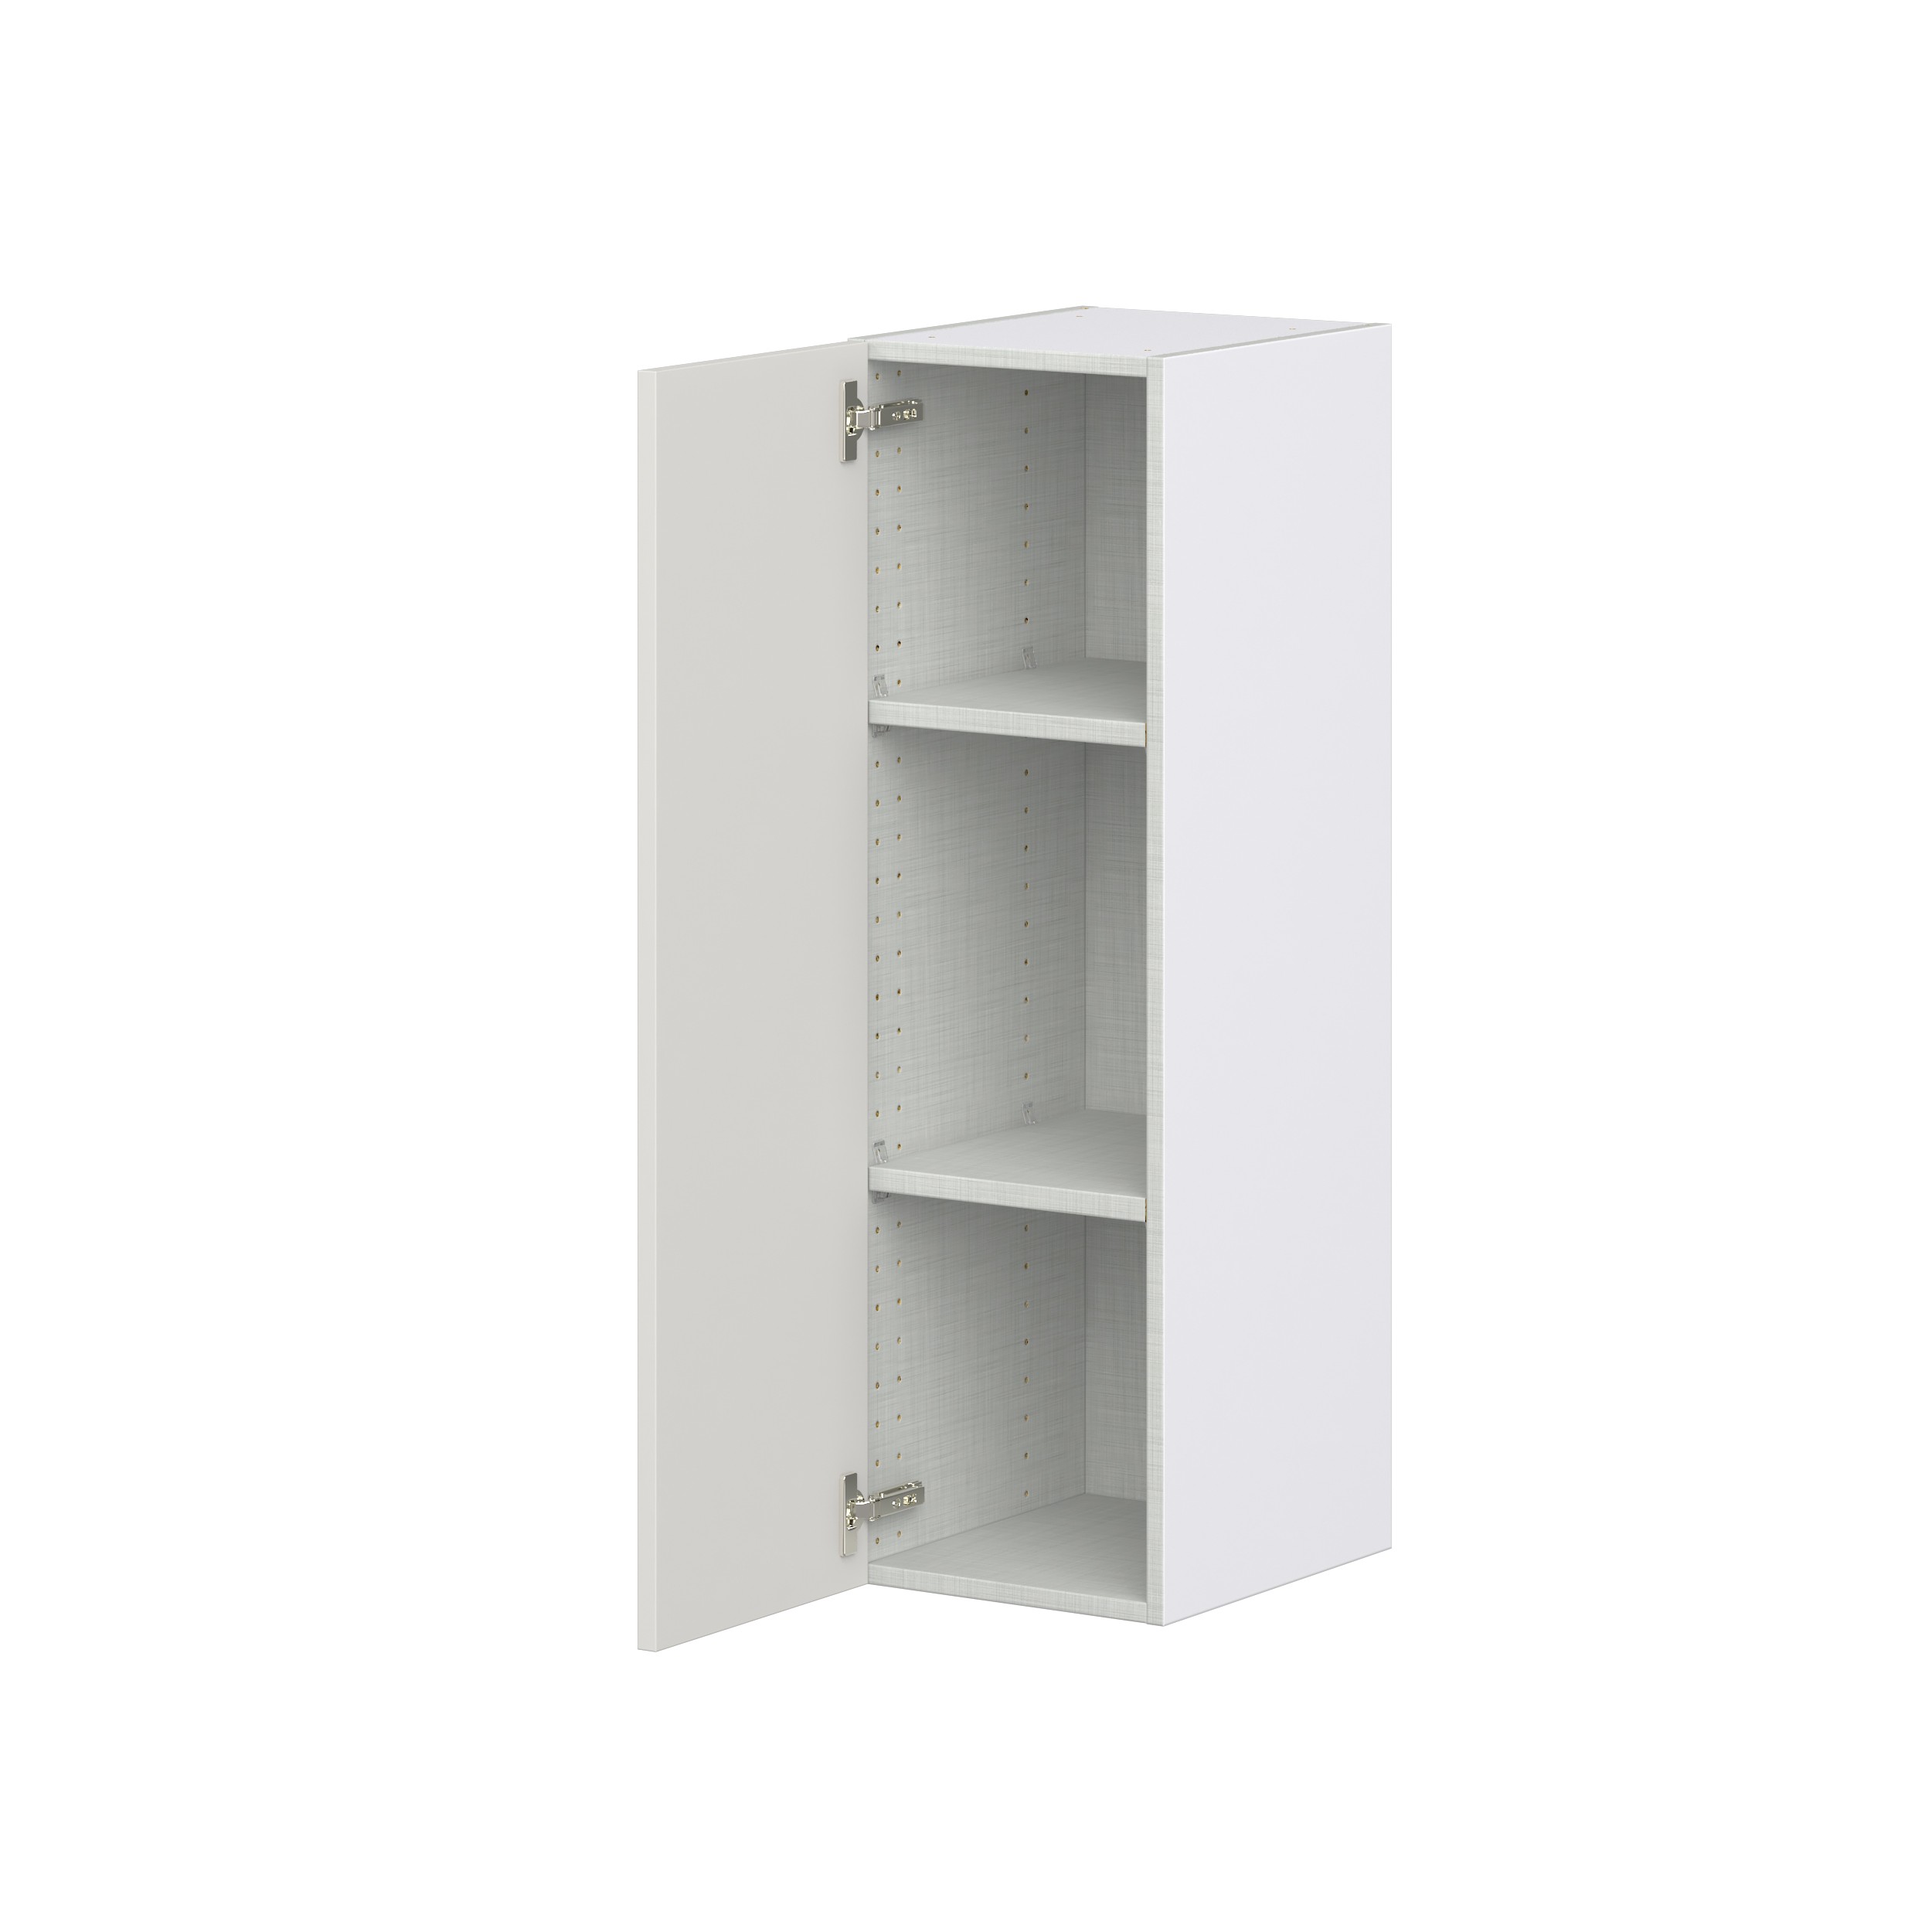 Wisteria Painted Light Gray Recessed Assembled Wall Cabinet with Full High Door (12 in. W x 40 in. H x 14 in. D)